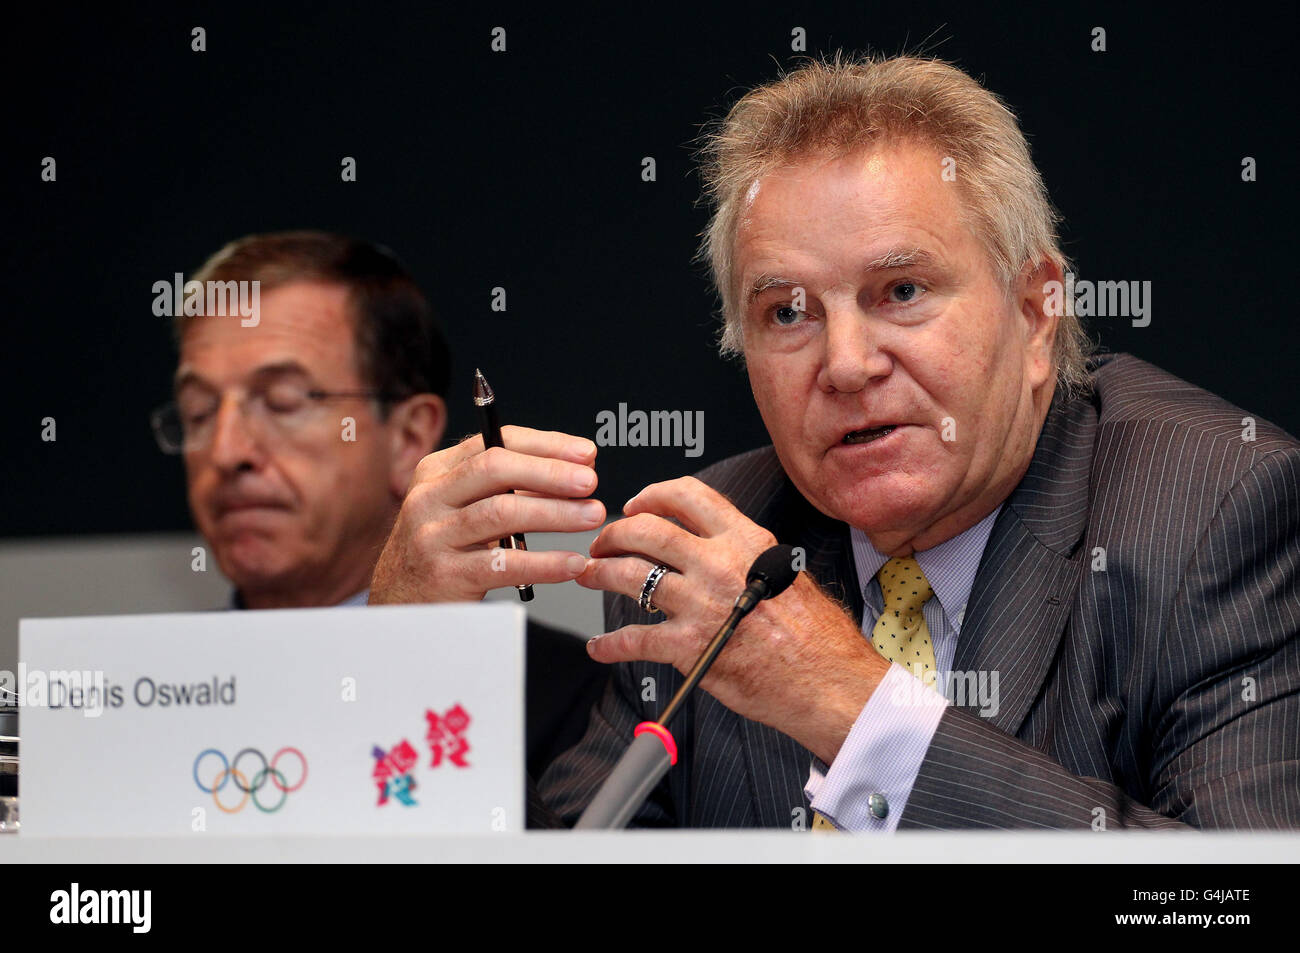 IOC Coordination Commission Chairman Denis Oswald (right) alongside IOC Executive Director for the Olympic Games Gilbert Felli (left) during the Closing Press Conference from the IOC Coordination Commission at Freshfield Bruckhaus Deringer, London. Stock Photo